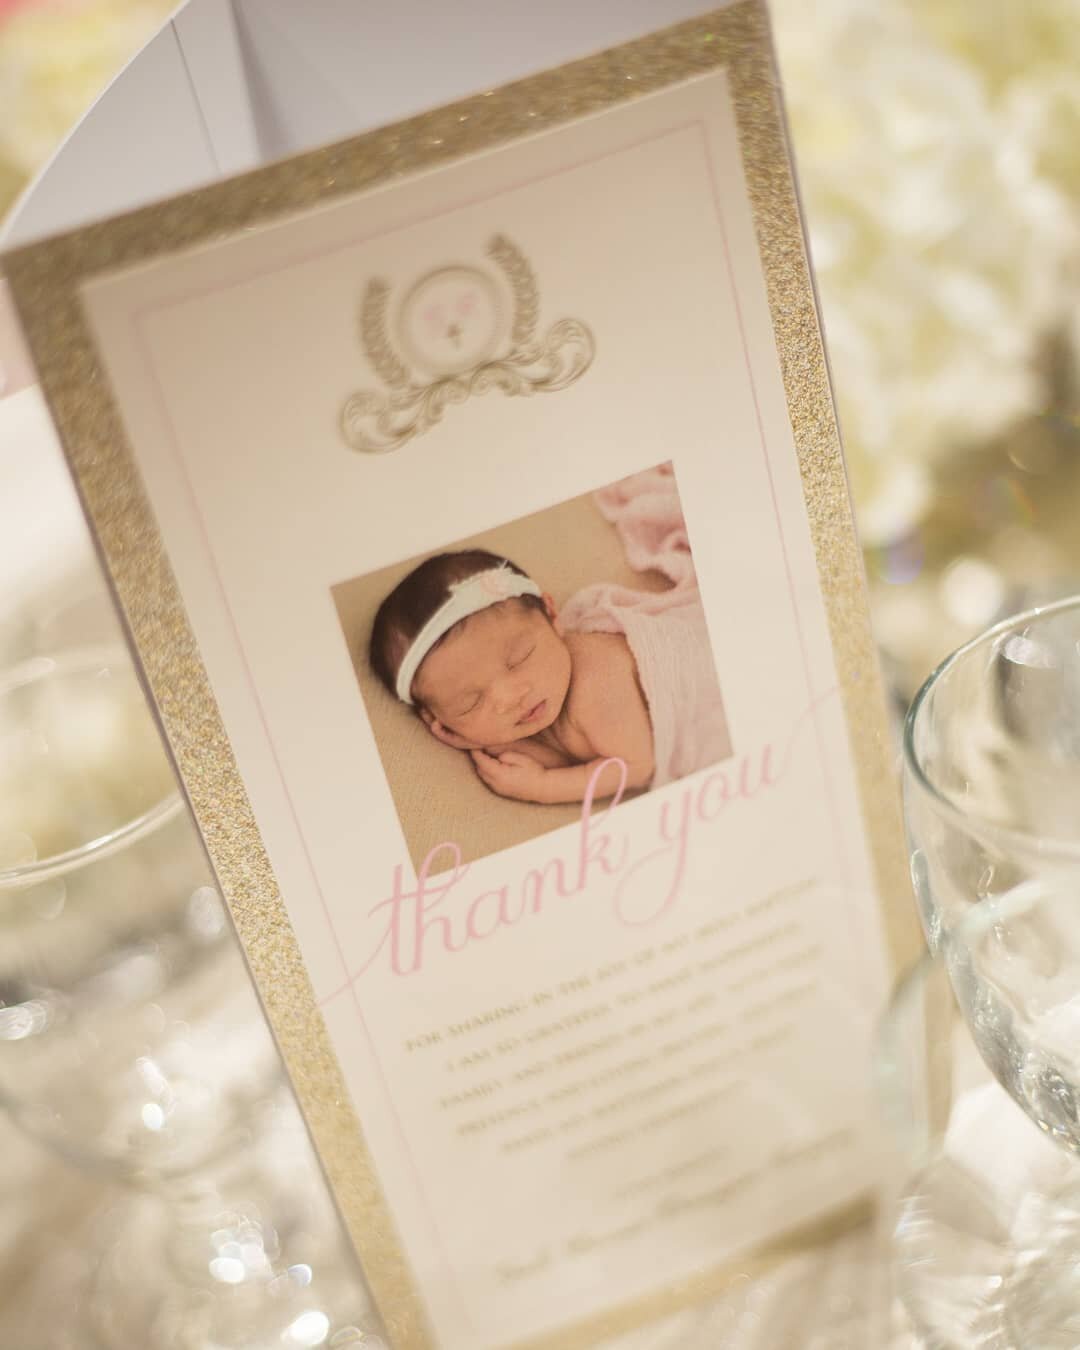 Love when our wonderful clients send us pictures from their special day ❤  We created day-of stationery for Giselle's baptismal reception, featuring soft pearl pinks, glitter gold, and ivory, adorned with gold accents. Scroll through to see some glam